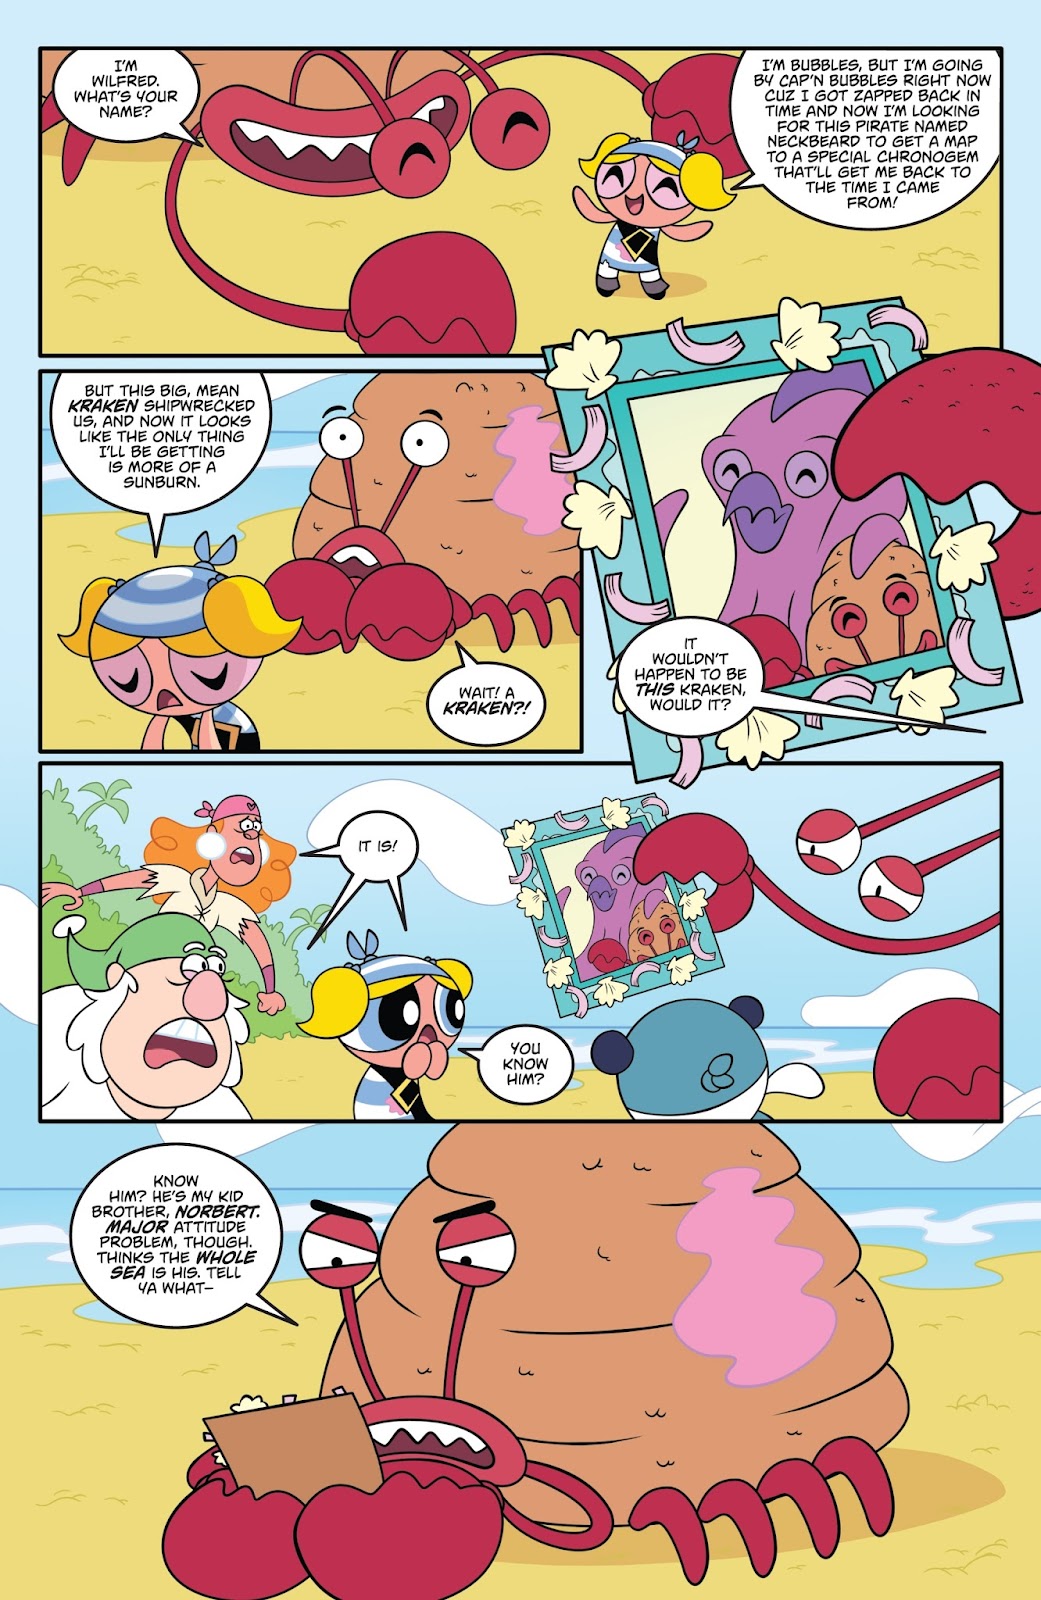 Powerpuff Girls: The Time Tie issue 2 - Page 17